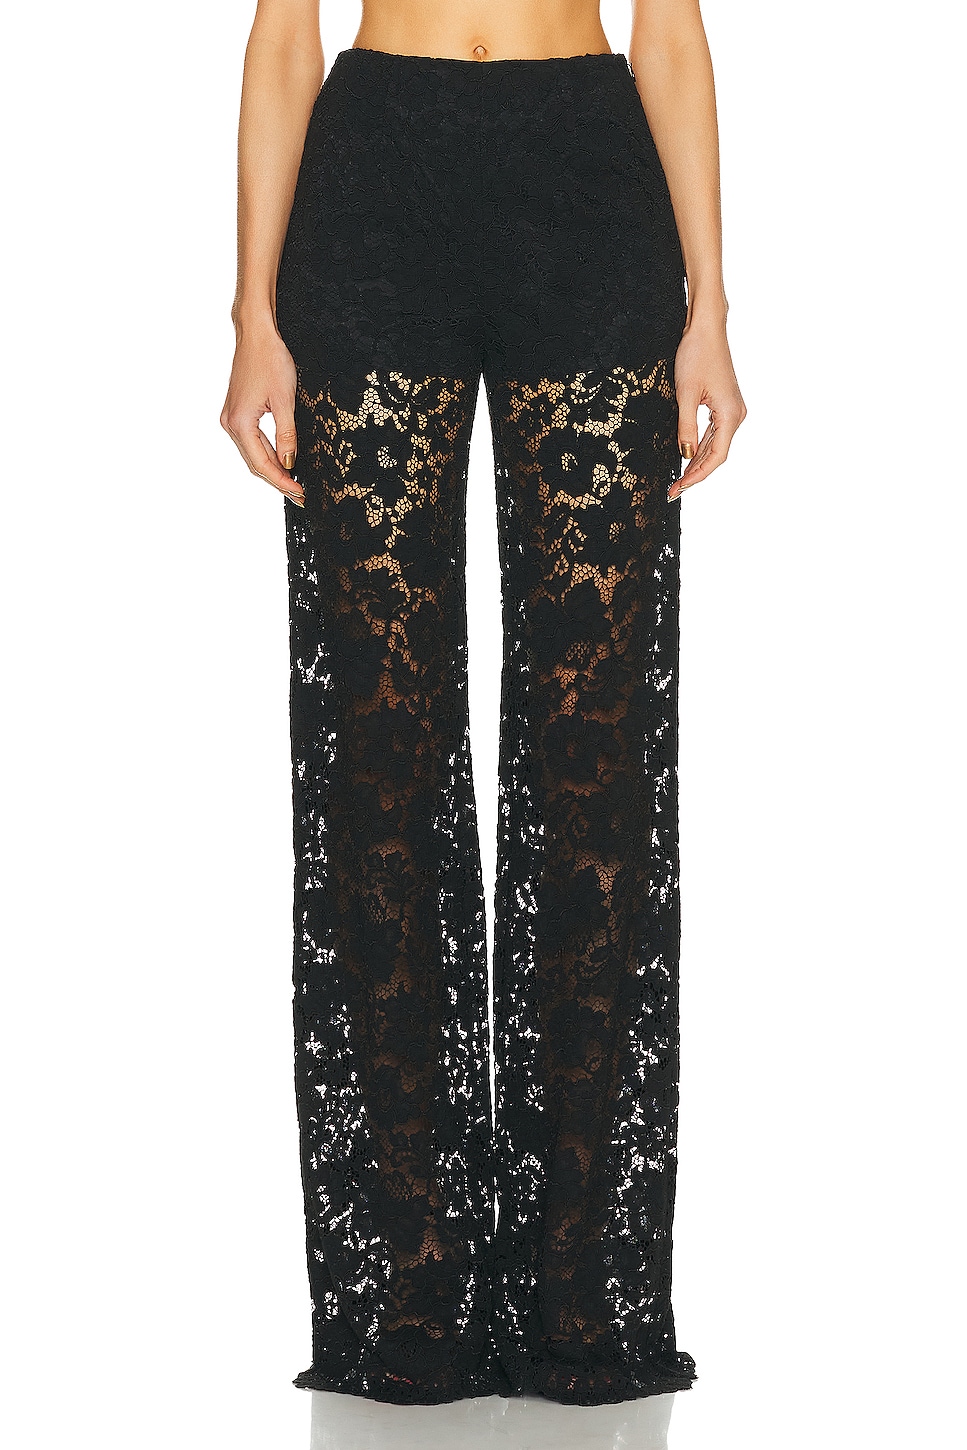 Image 1 of SANS FAFF London Lace Flared Pant in Black